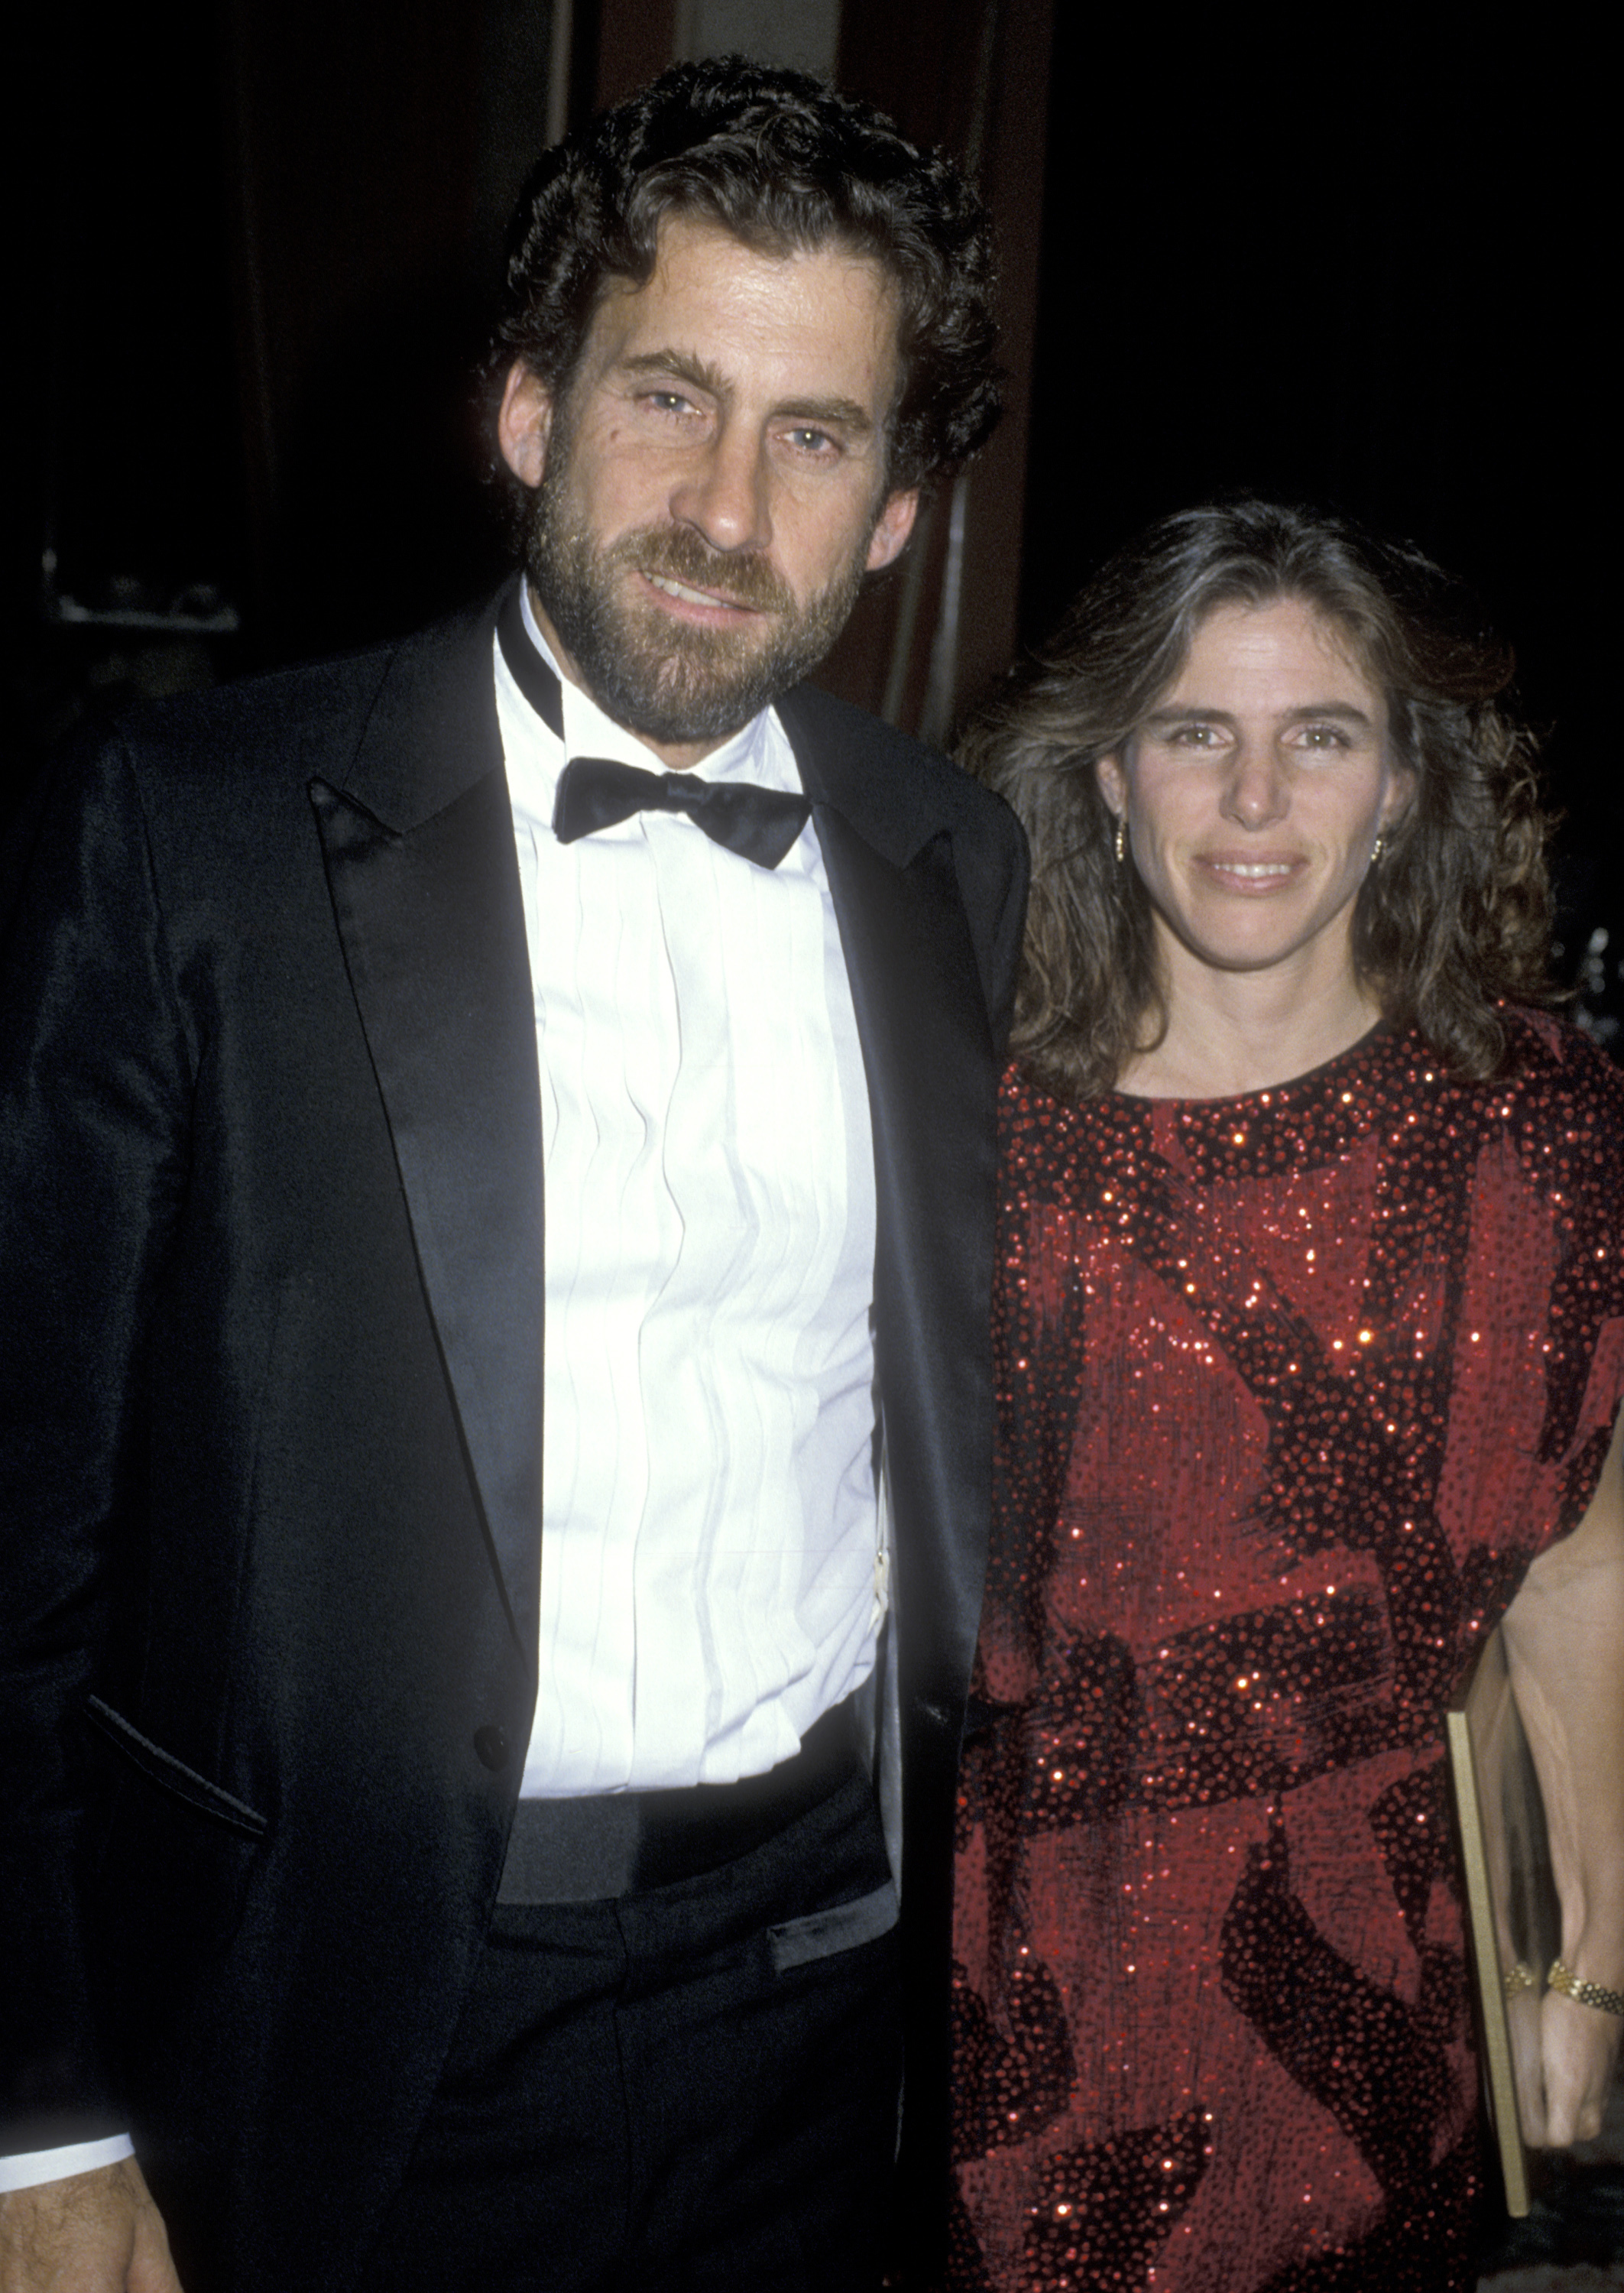 Paul Michael Glaser and his wife Elizabeth Glaser attend the 38th Annual Directors Guild of America Awards at Beverly Hilton Hotel on March 8, 1986, in Beverly Hills, California. | Source: Getty Images